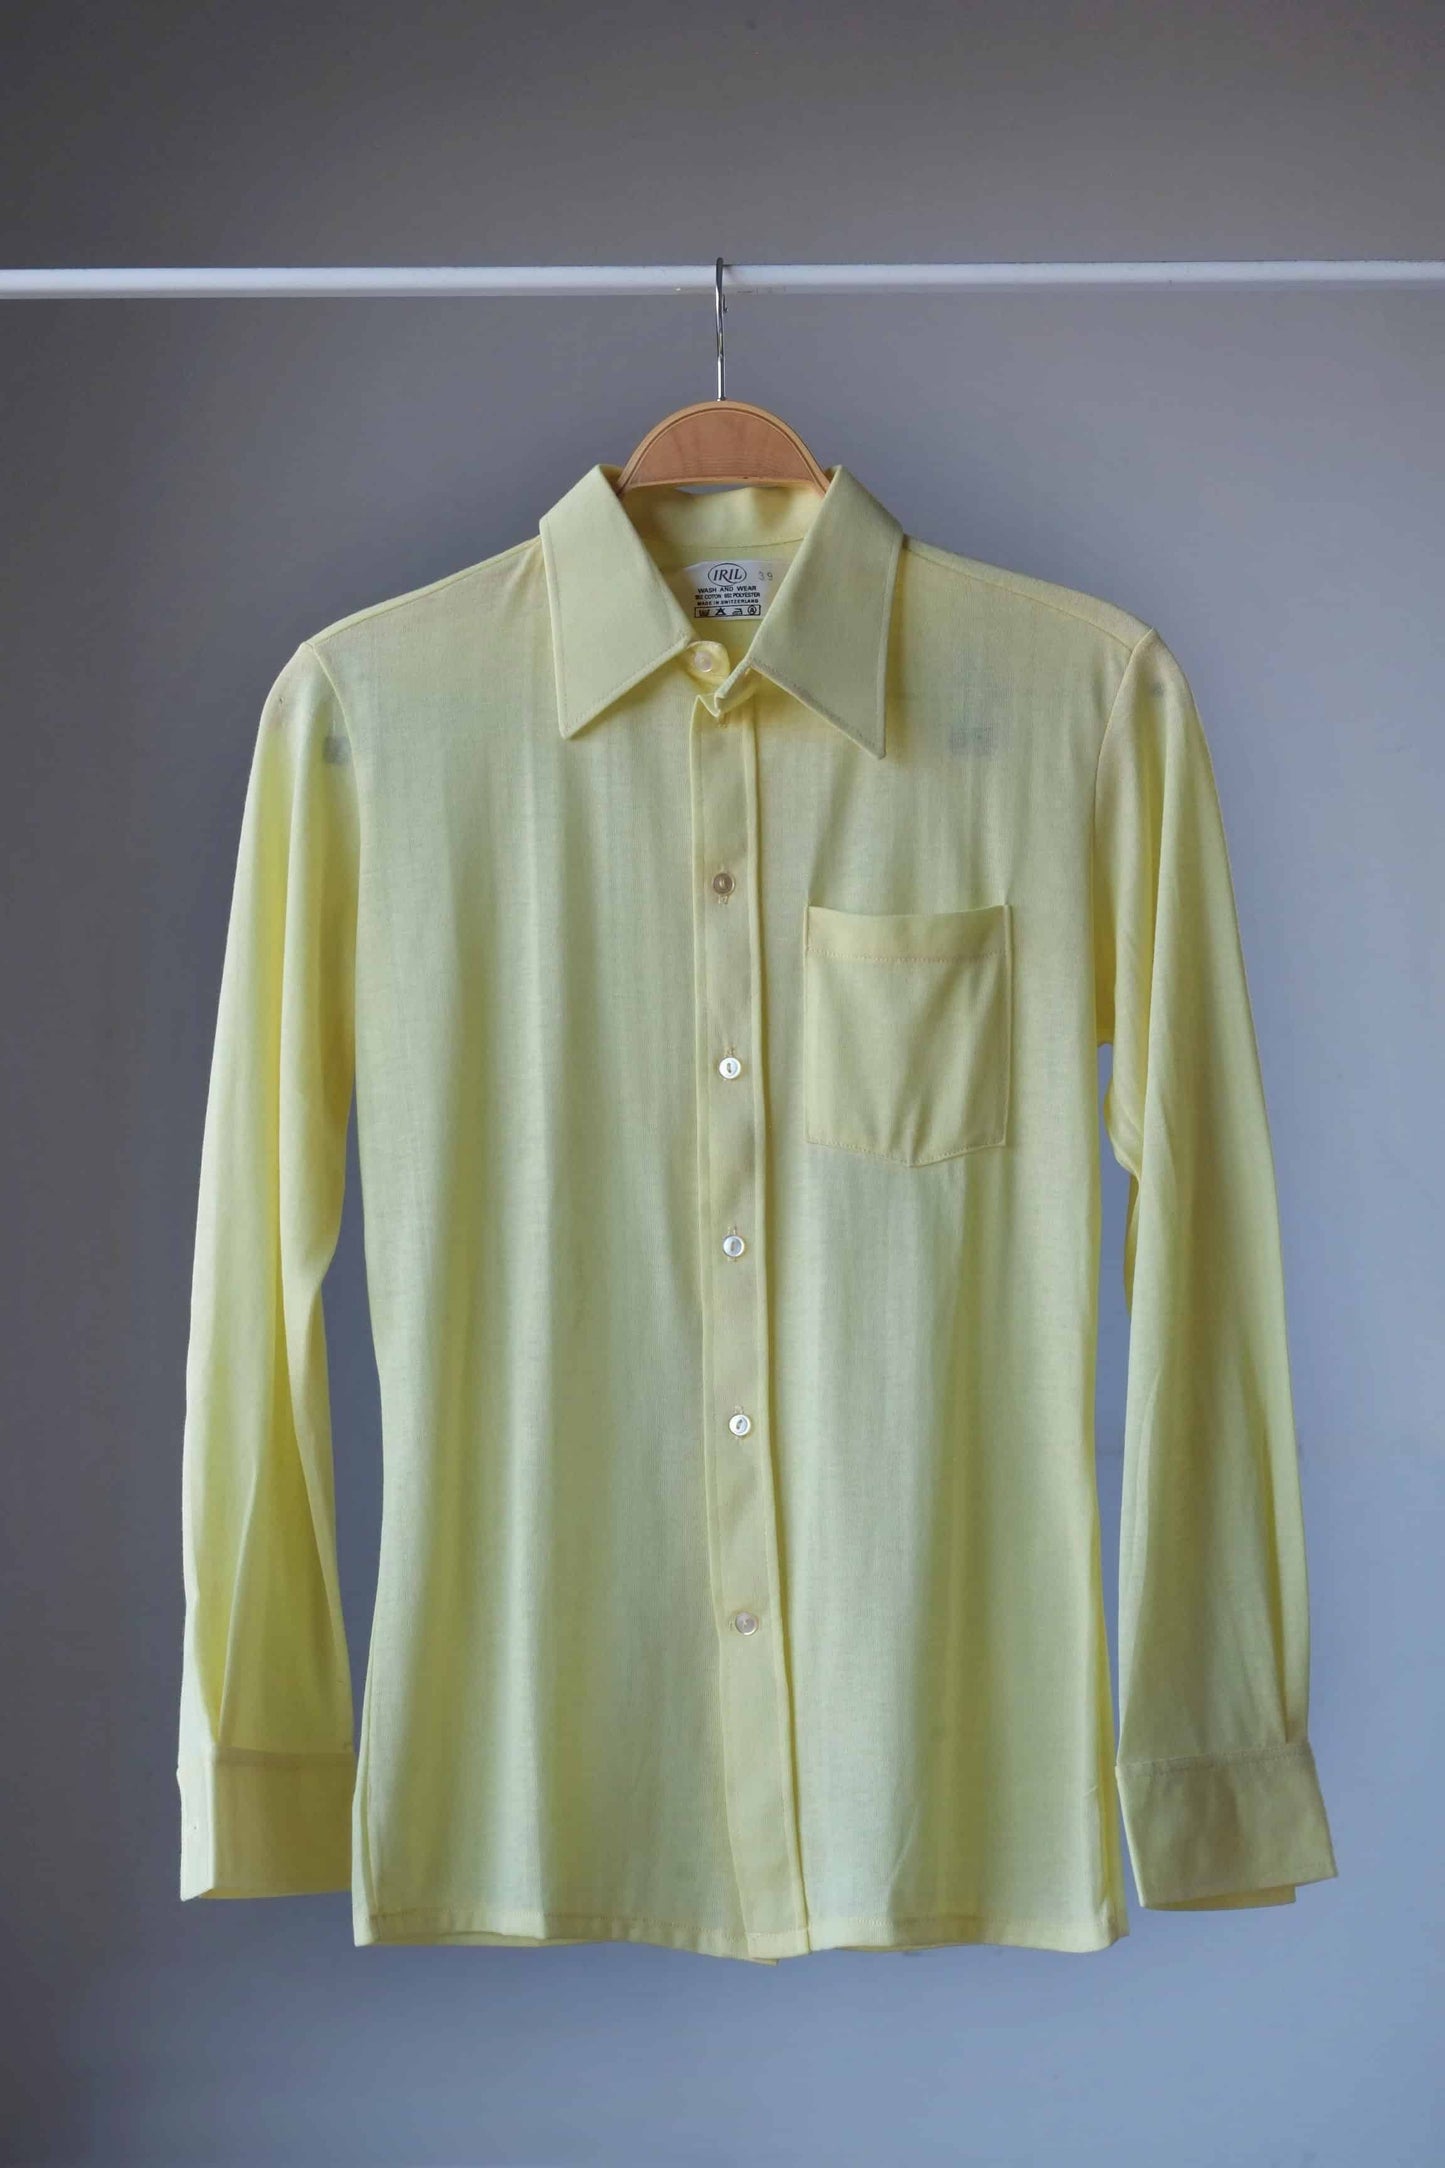 Vintage 70s pointy collar shirt yellow